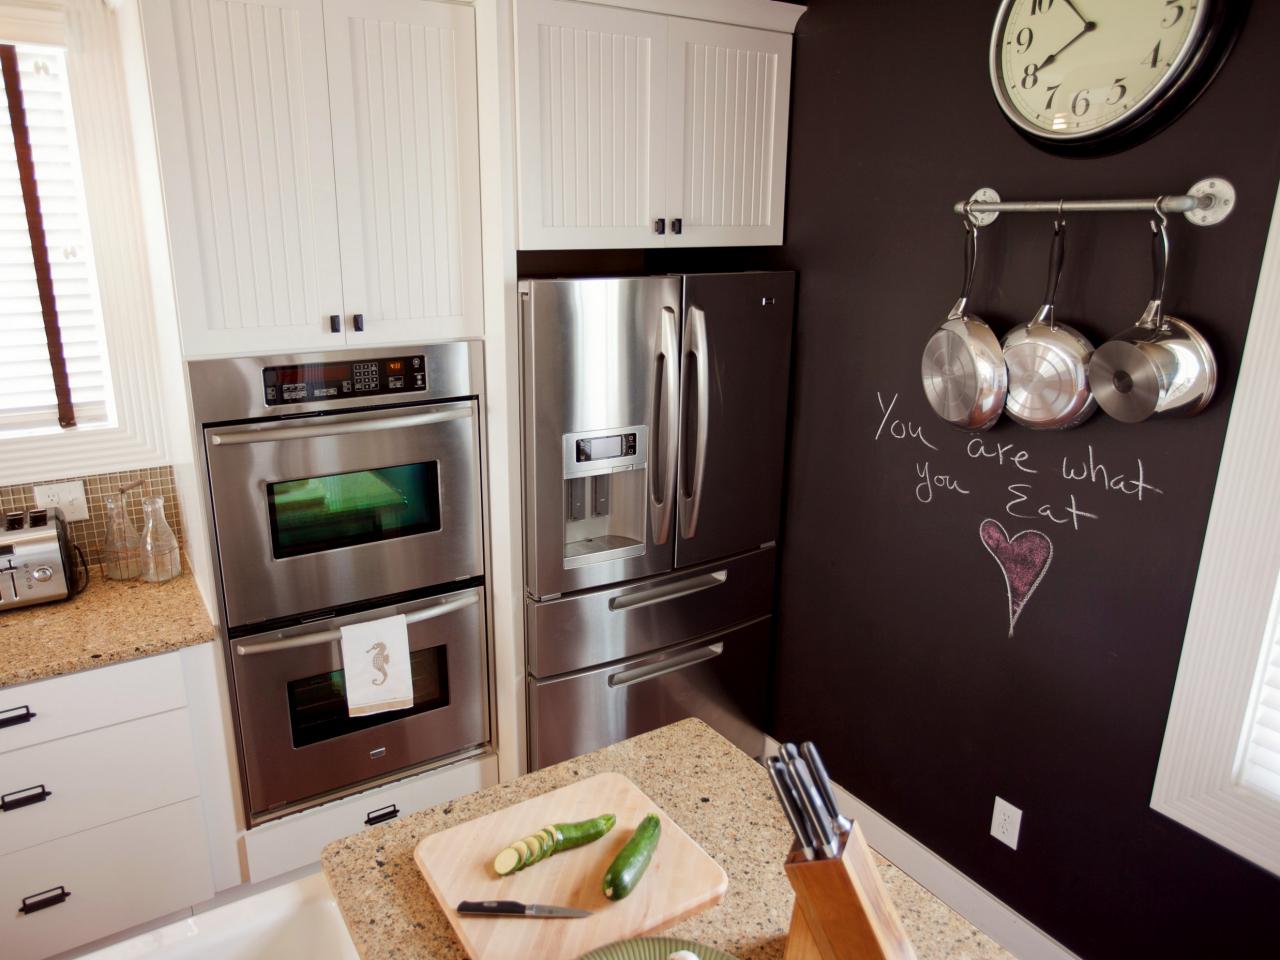 How To Paint A Kitchen Chalkboard Wall - Chalk Wall In Kitchen - HD Wallpaper 